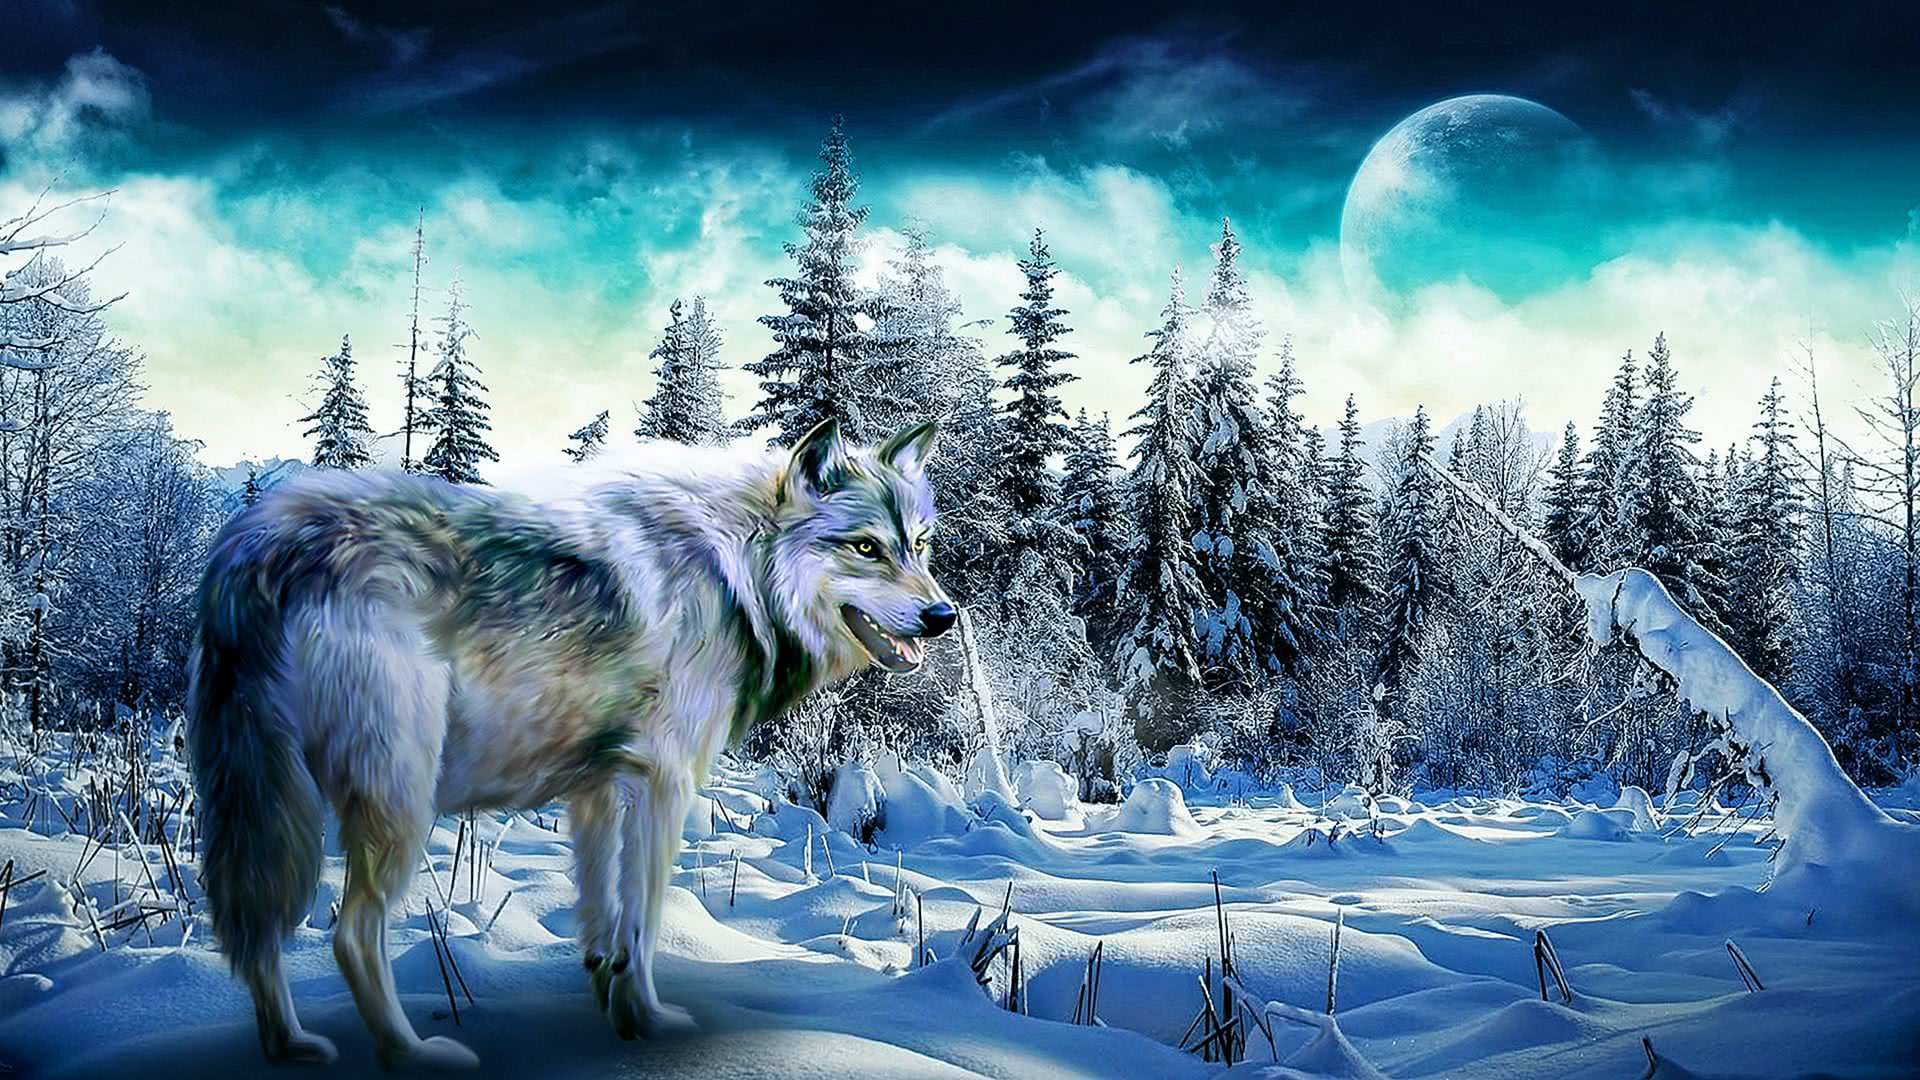 Cool Blue Wolf Wallpaper Image 49